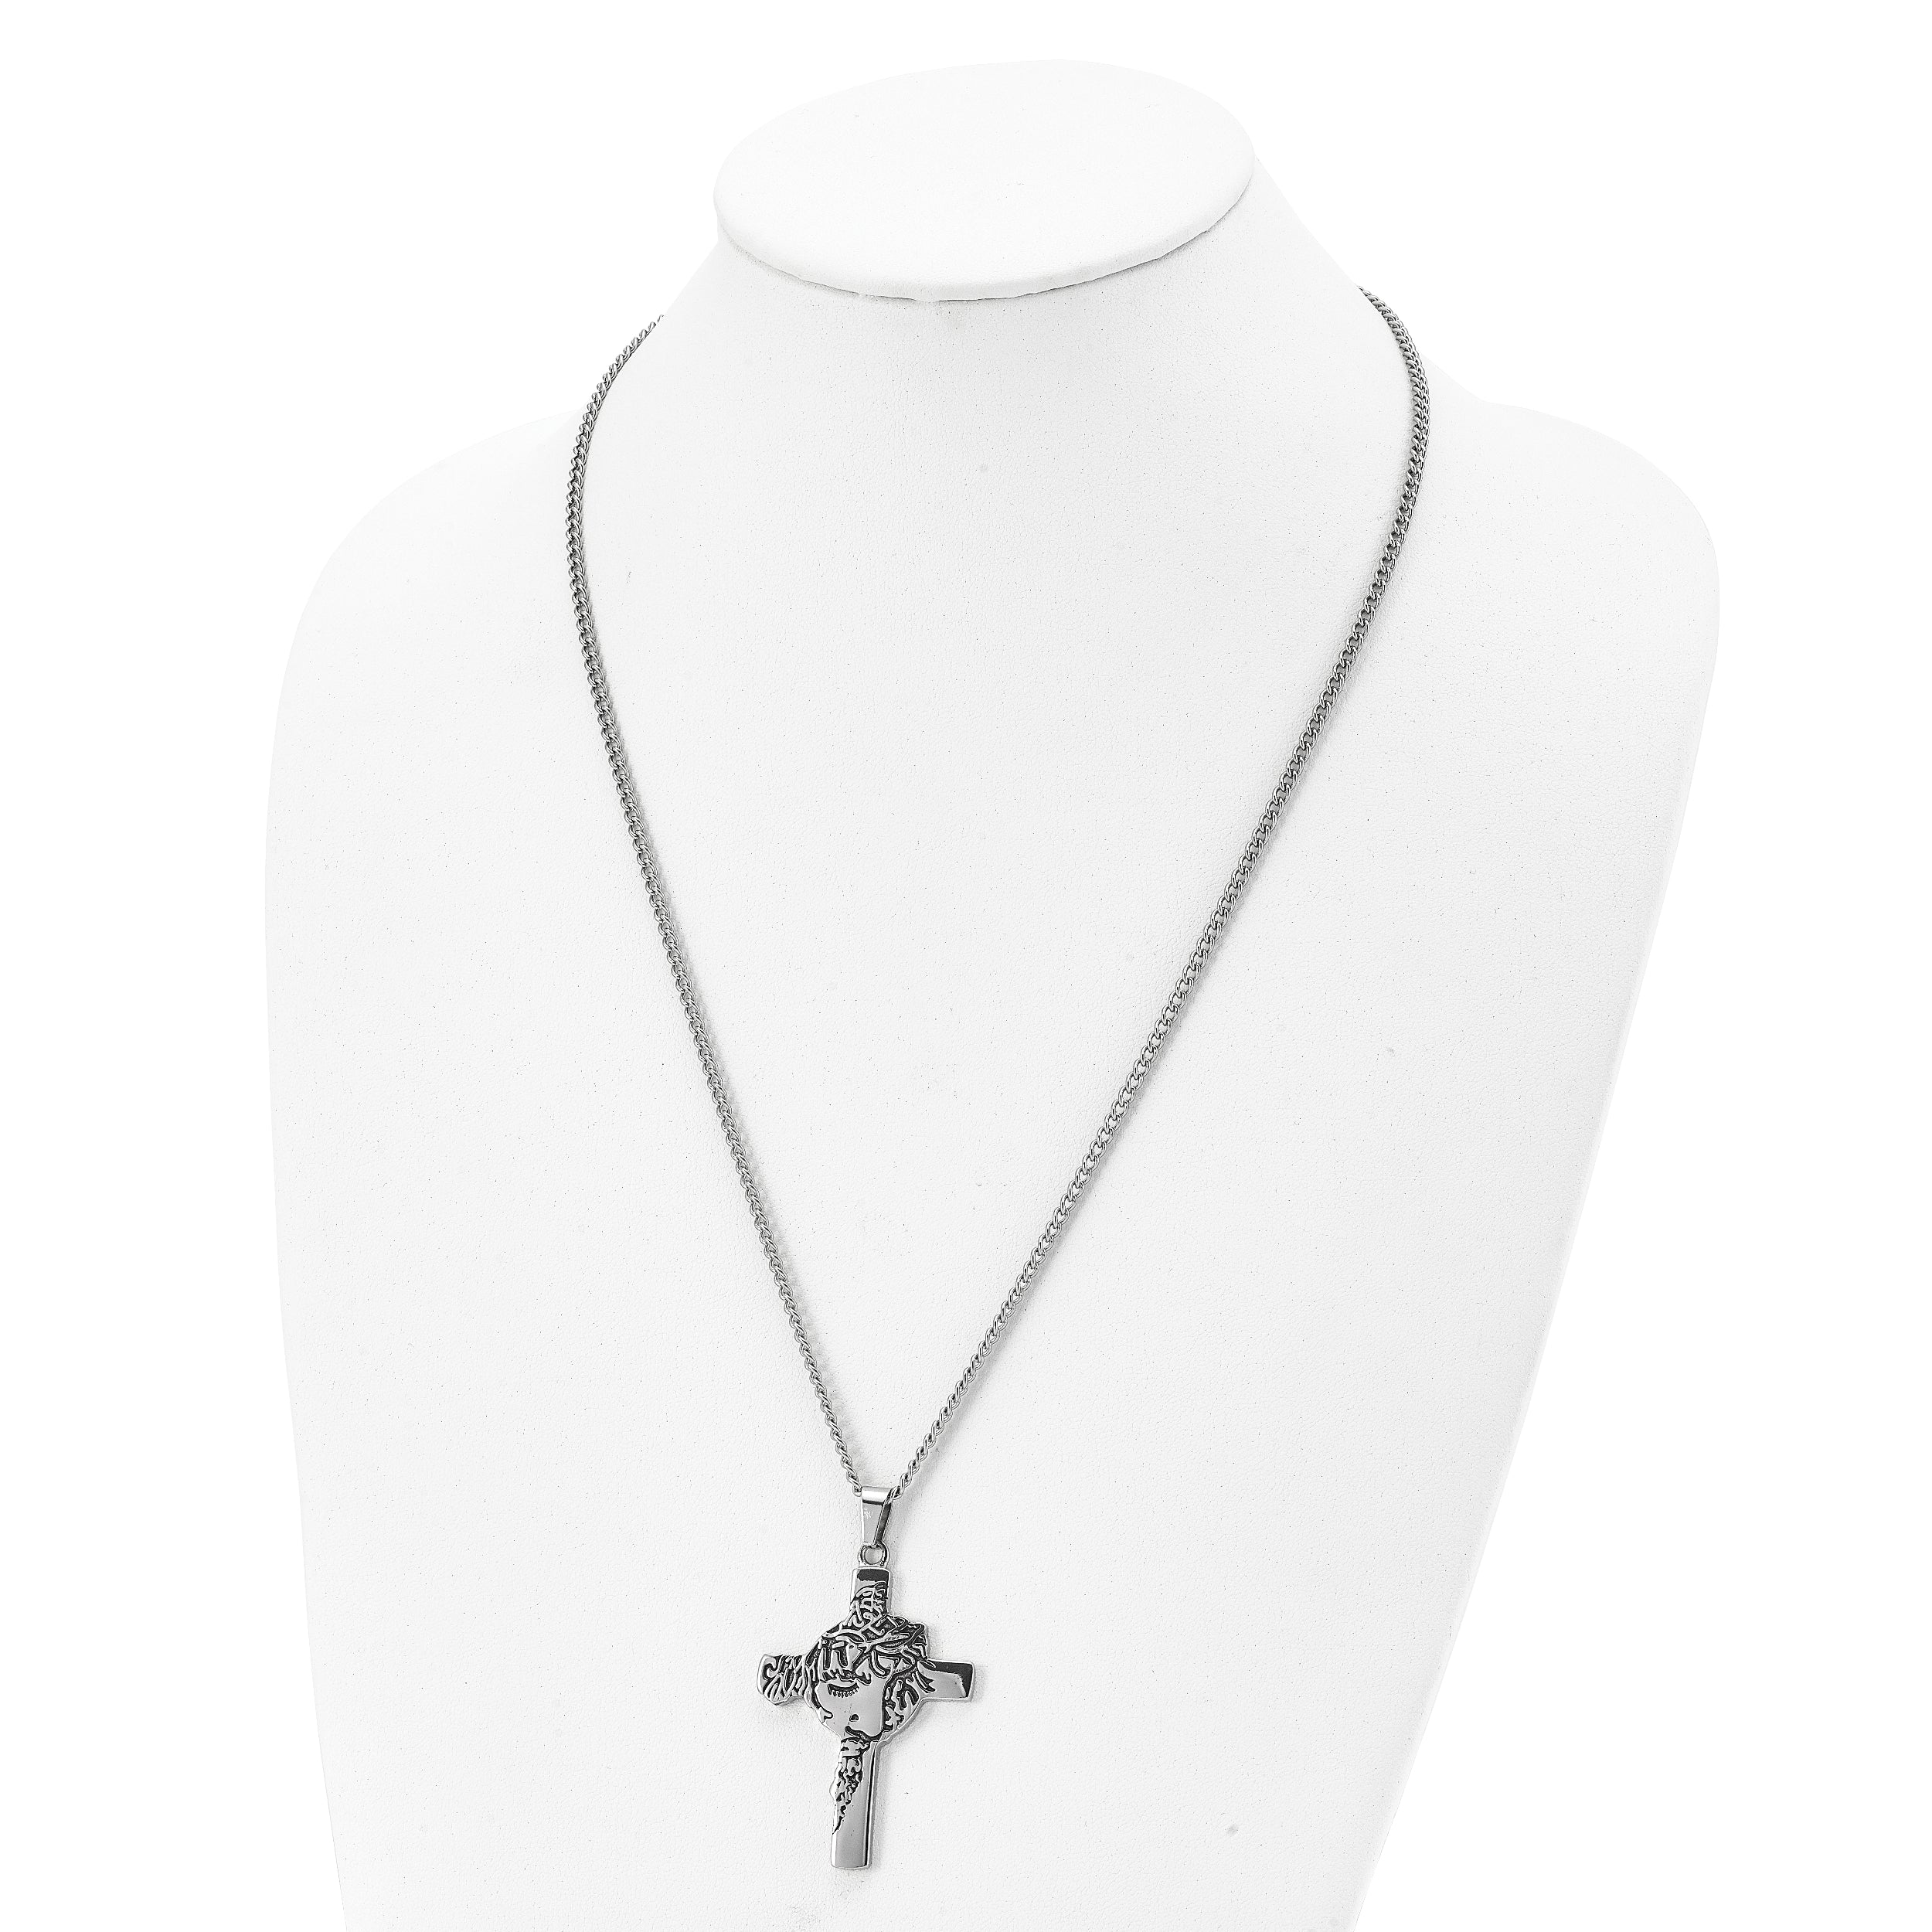 Chisel Stainless Steel Antiqued and Polished Jesus Face Cross Pendant on a 24 inch Curb Chain Necklace